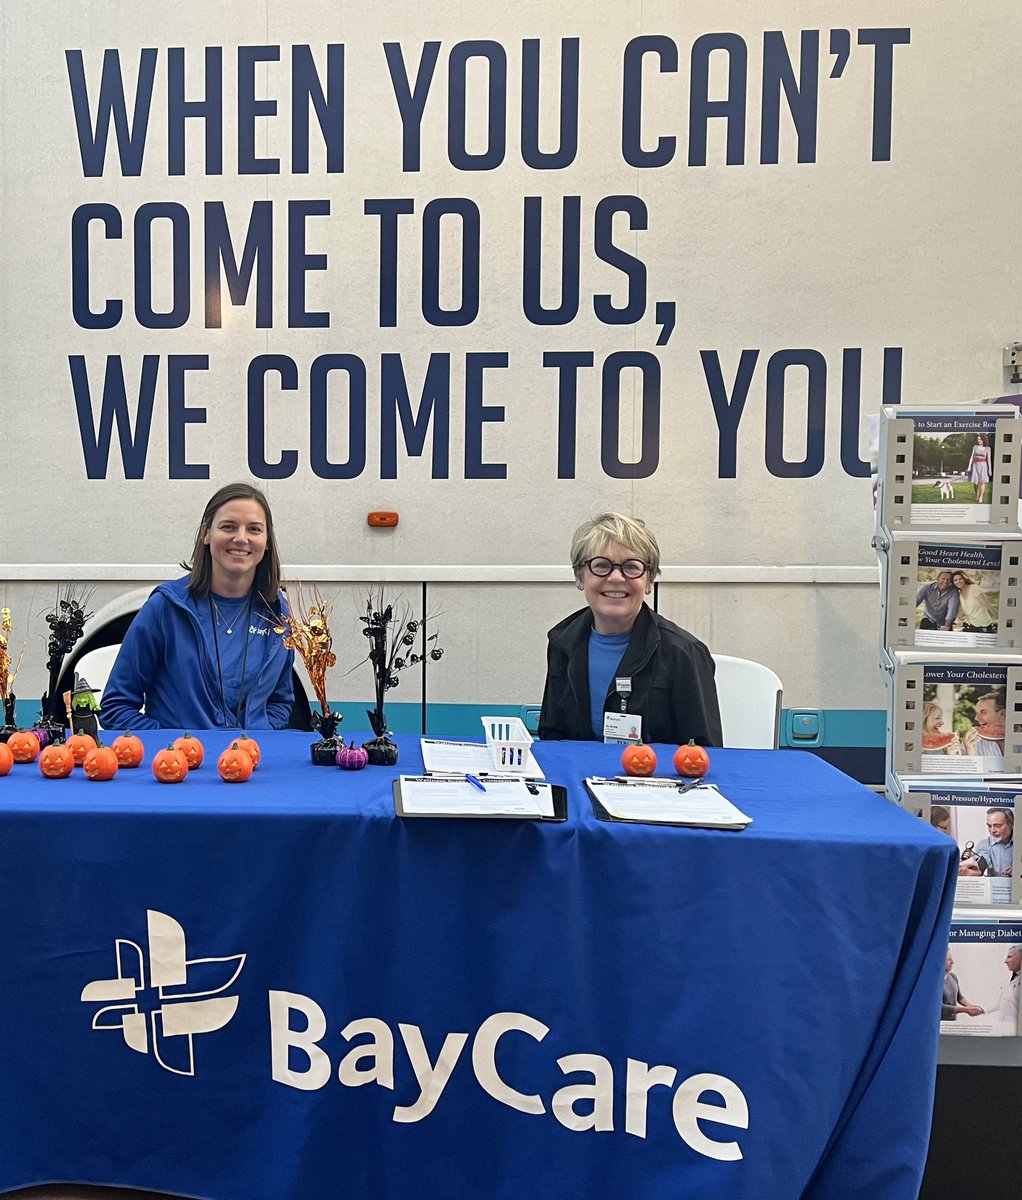 Excited to be part of Pasco Community Night! We’re offering free health screenings and information while having a great time supporting @PascoSheriff and @FeedingTampaBay at @ShopWiregrass.